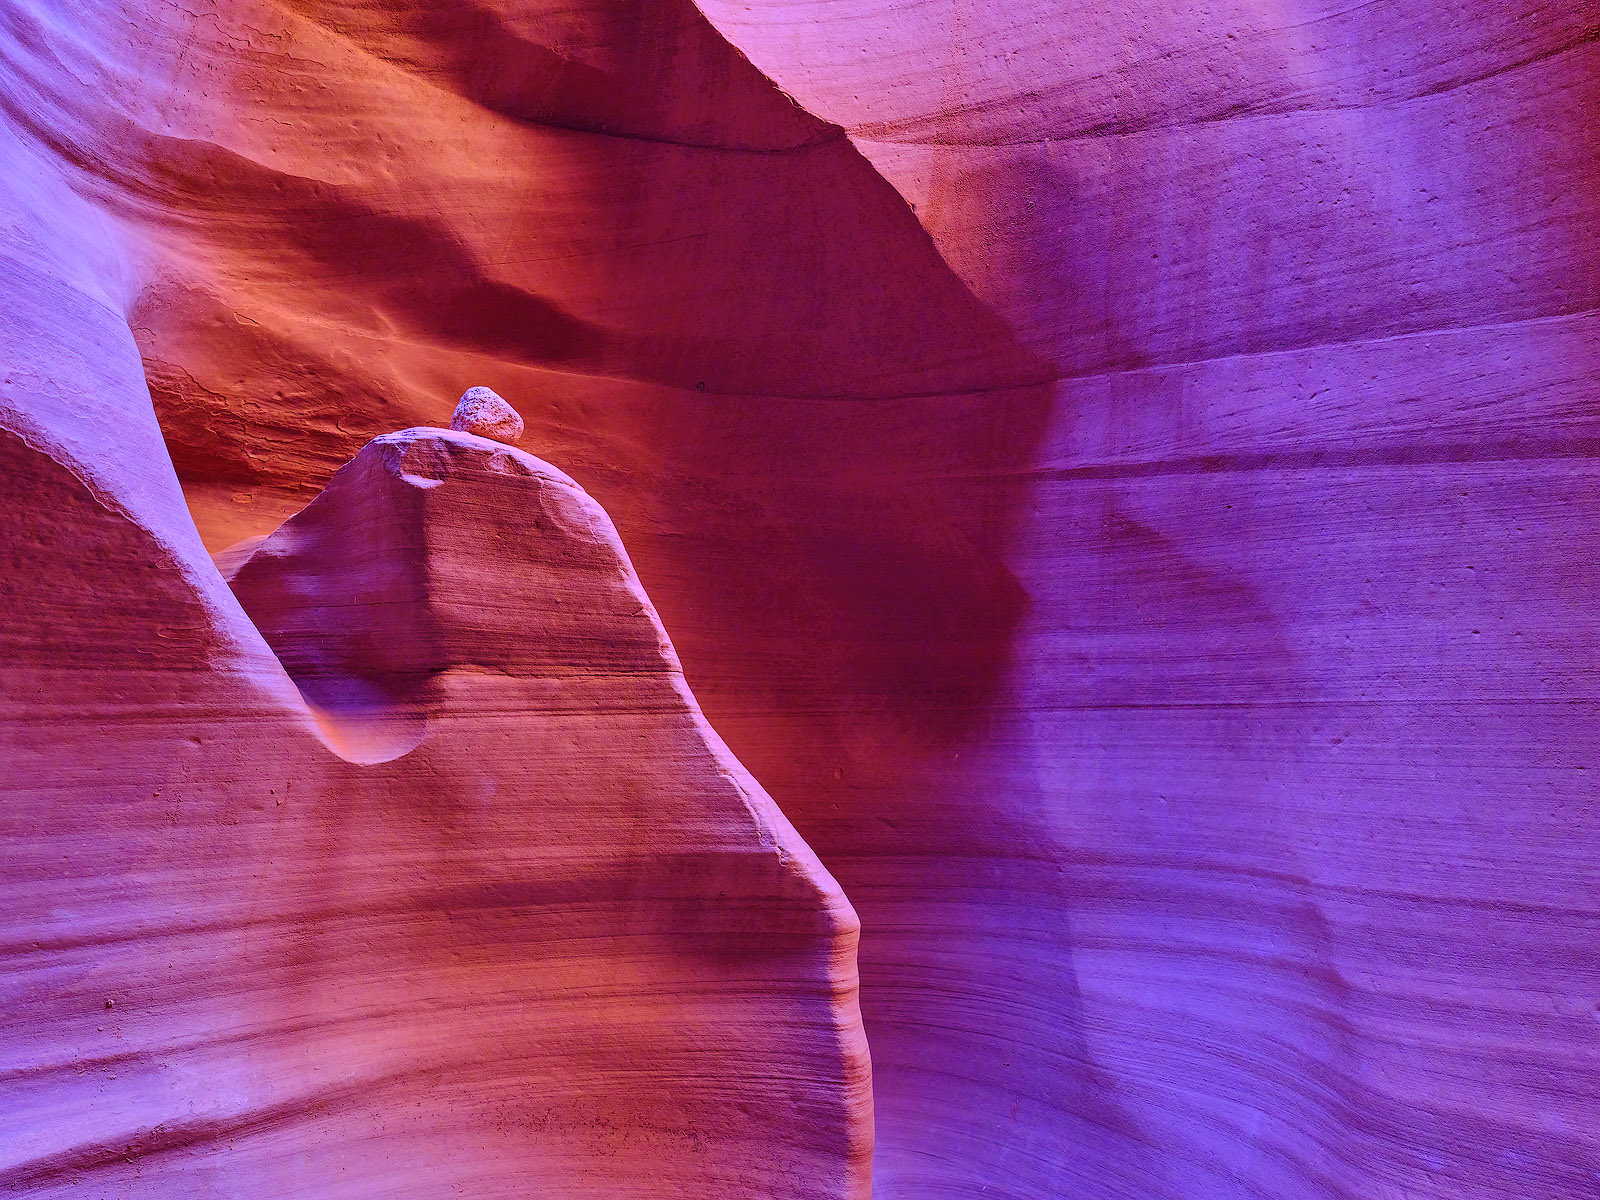 a fine art photograph inside of Antelope Canyon in Page, Arizona with a rock that has landed on top of one of the walls. Arizona Photography by Andrew Shoemaker